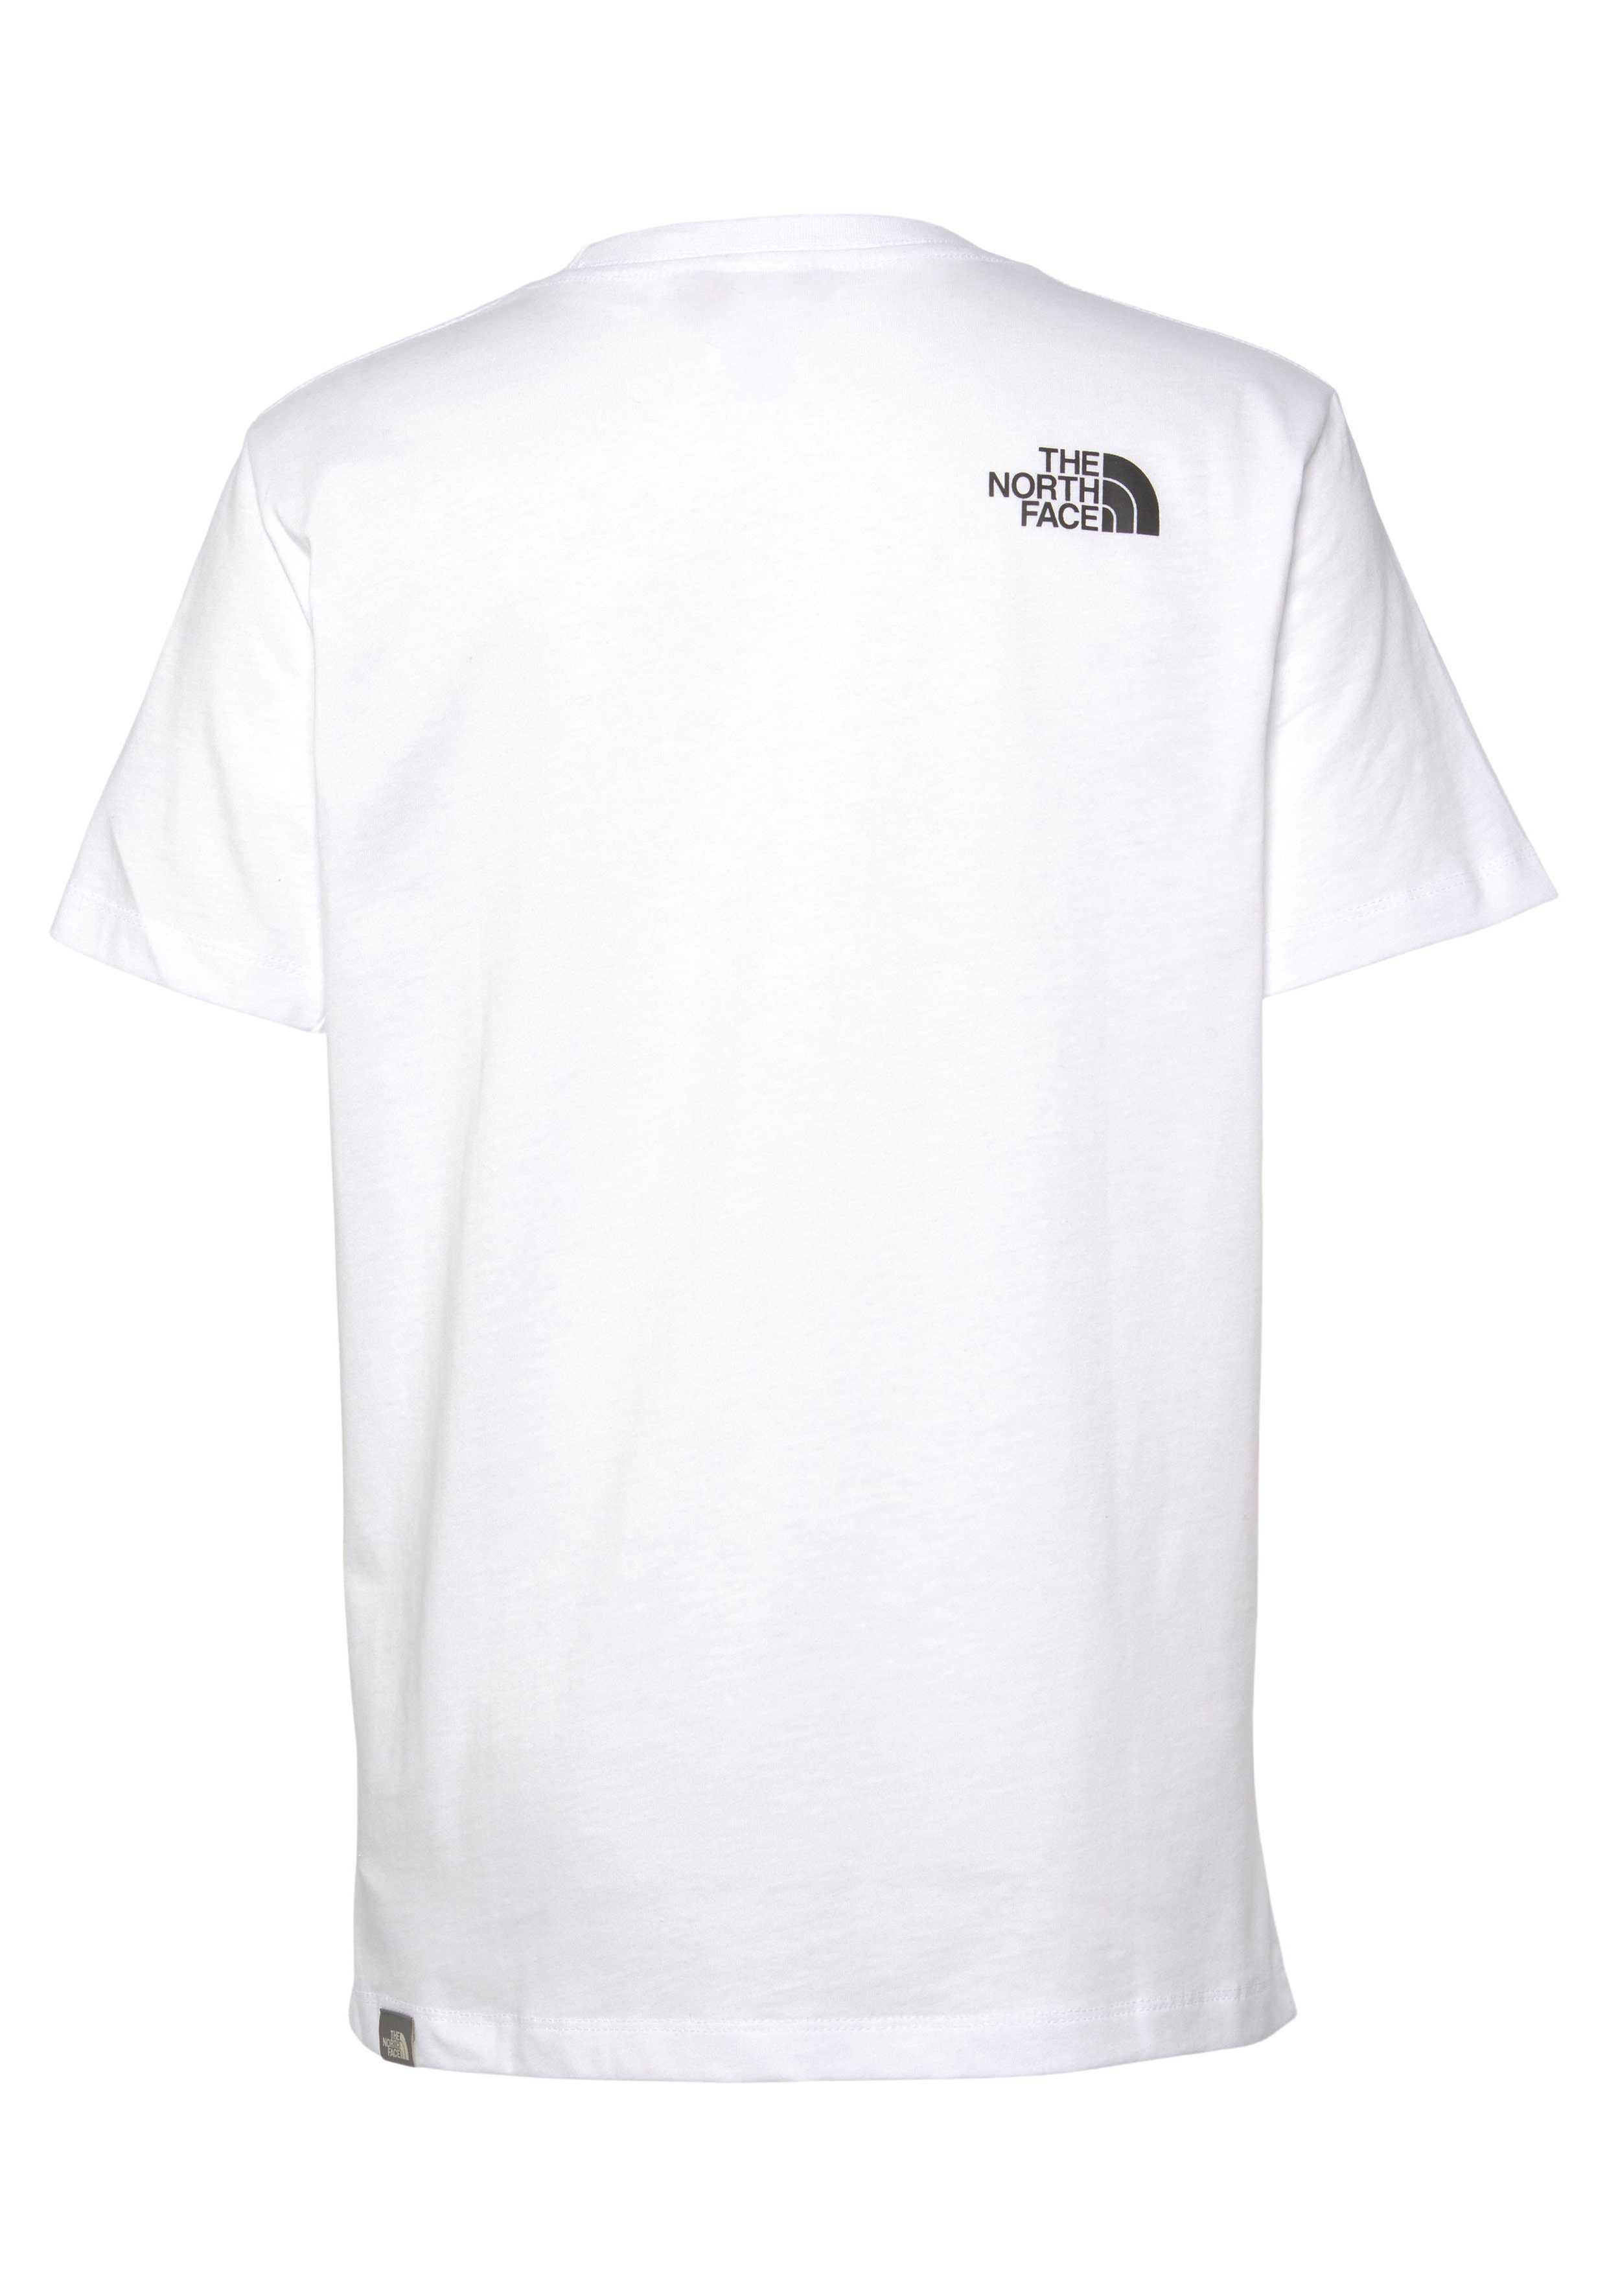 Kinder TEE Face - EASY The white T-Shirt North für